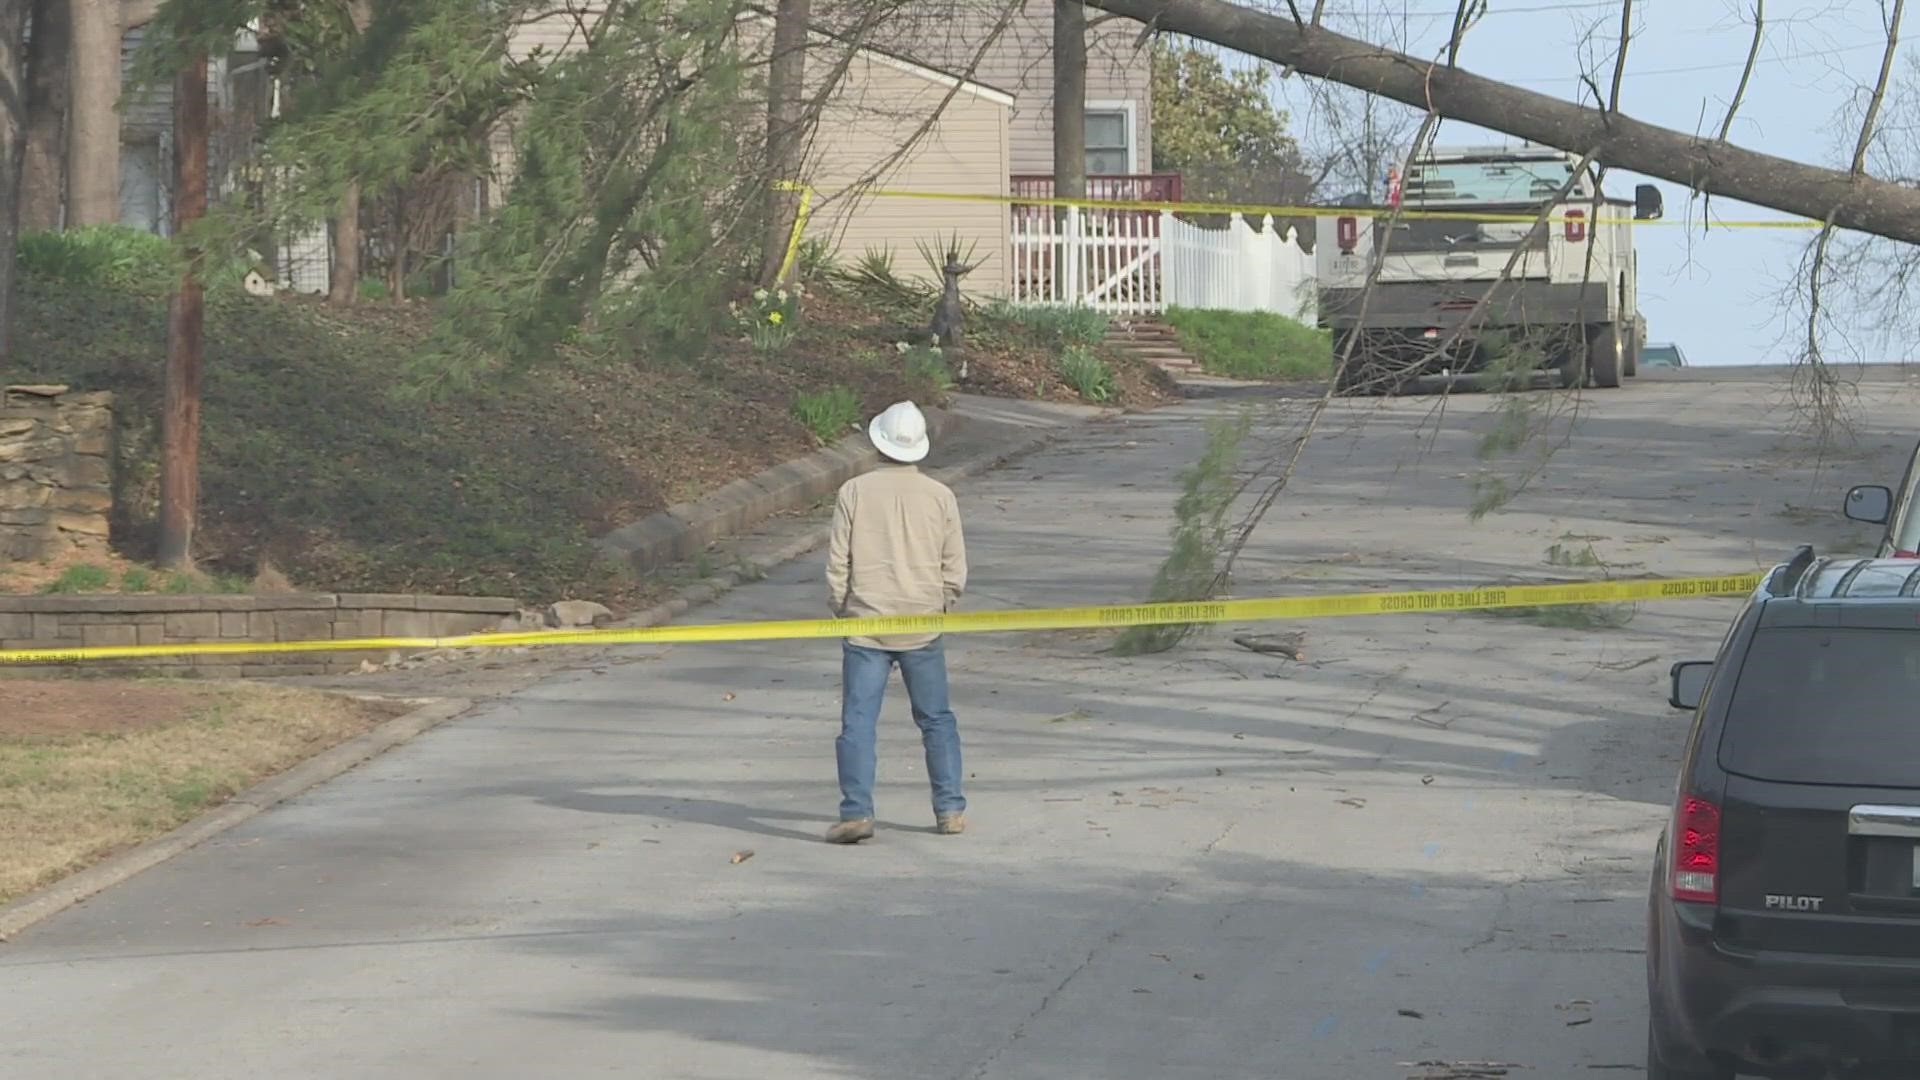 Residents in the Louisville community are lending a helping hand after recent record winds left many without power and damage around their homes.